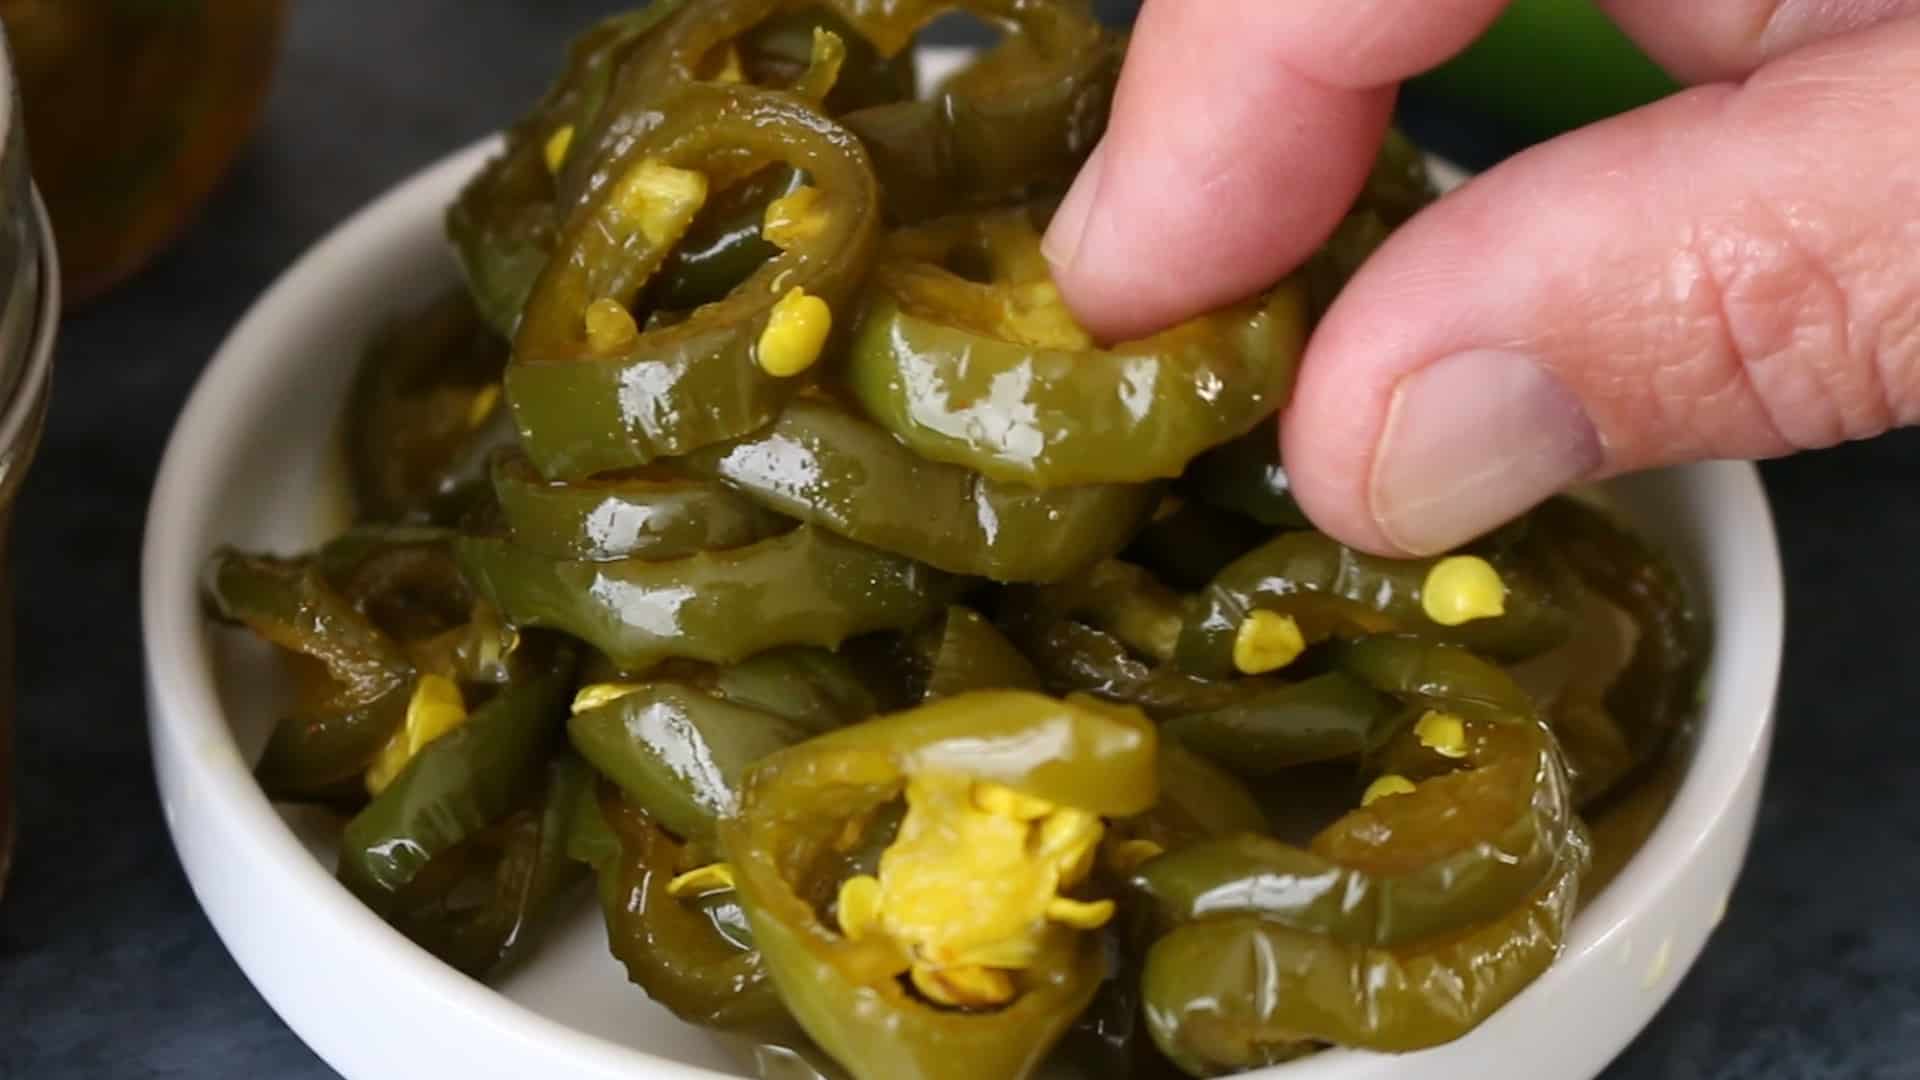 Grabbing some Candied Jalapenos (Cowboy Candy)